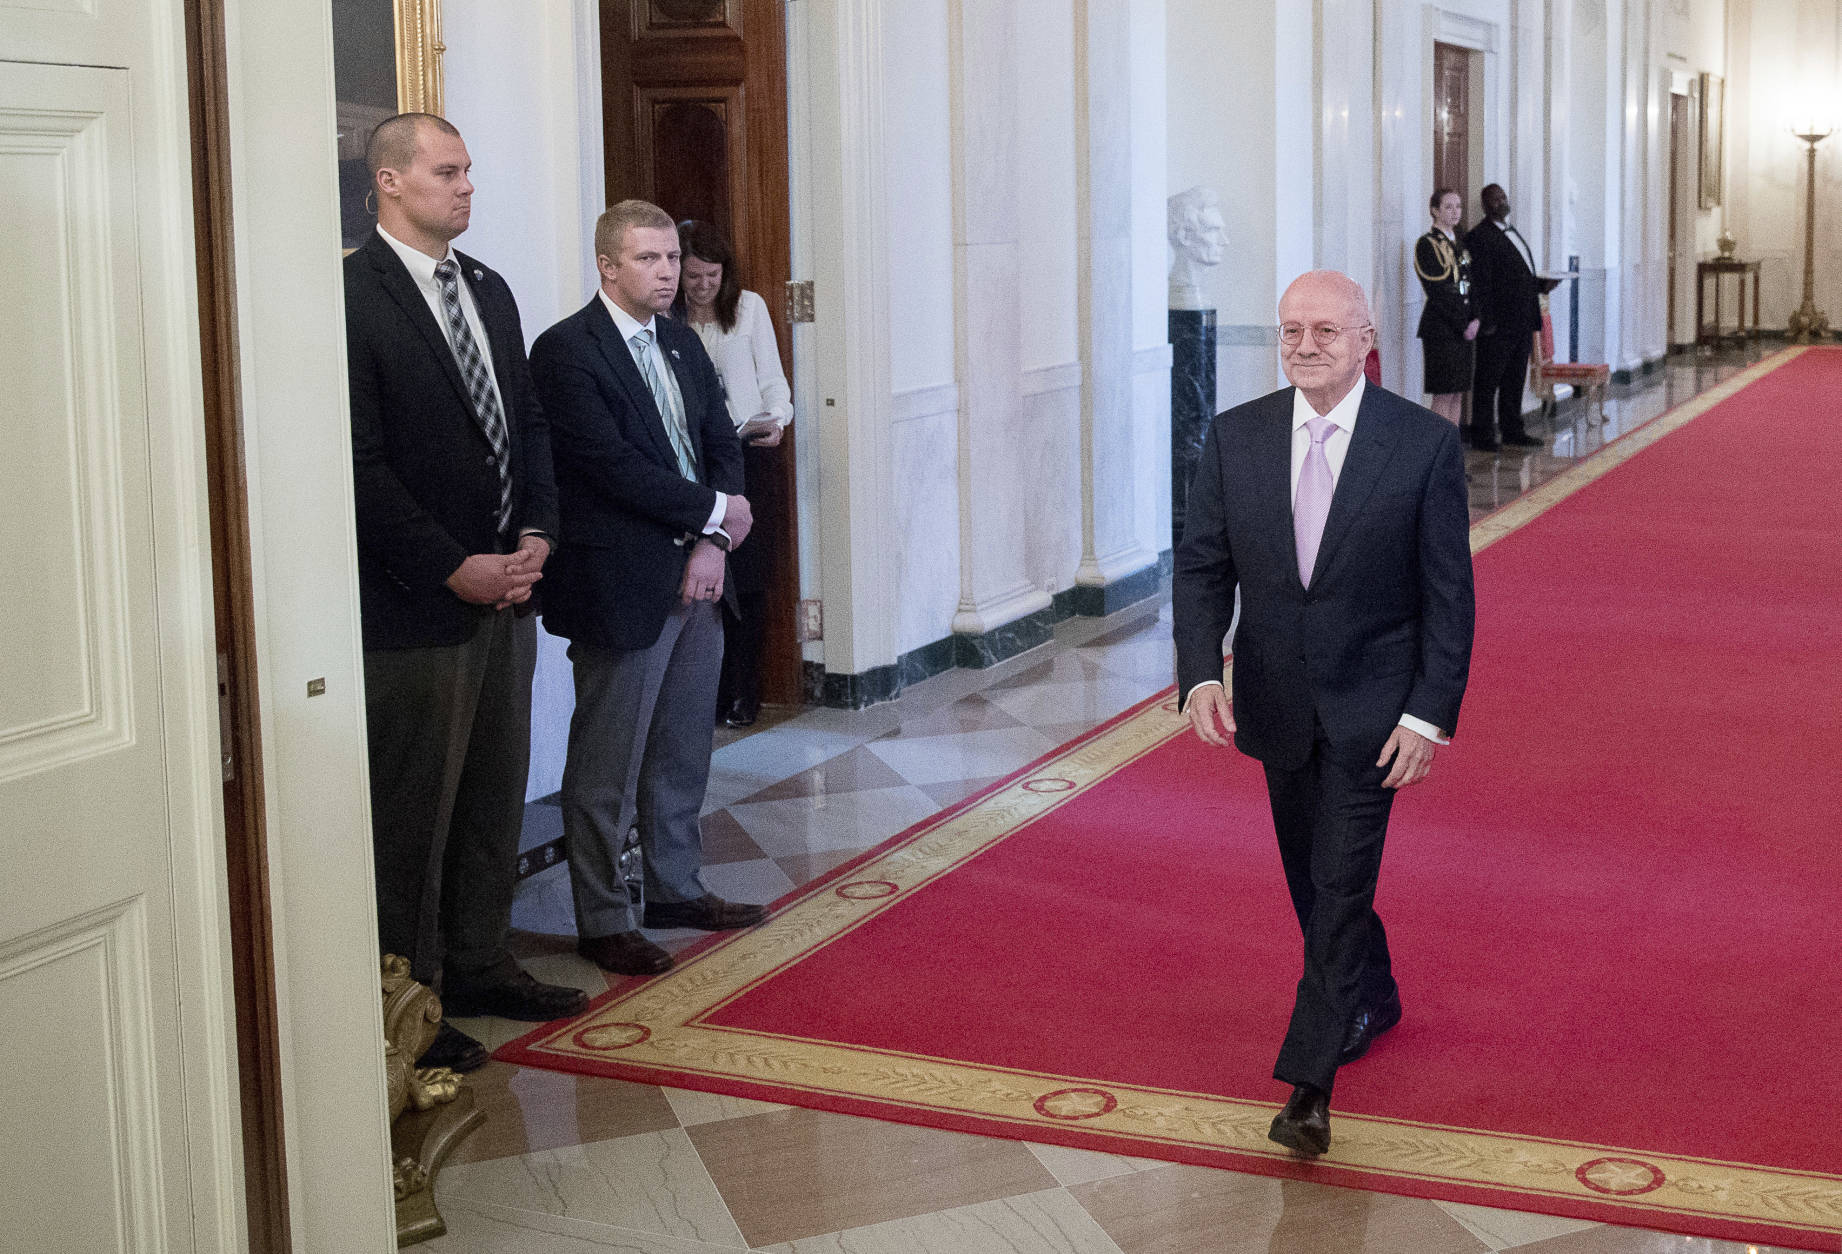 Miami Dade College President Eduardo Padron, right, arrives for a Presidential Medal of Freedom ceremony in the East Room of the White House, Tuesday, Nov. 22, 2016, in Washington. Obama is recognizing 21 Americans with the nation's highest civilian award, including giants of the entertainment industry, sports legends, activists and innovators. (AP Photo/Andrew Harnik)